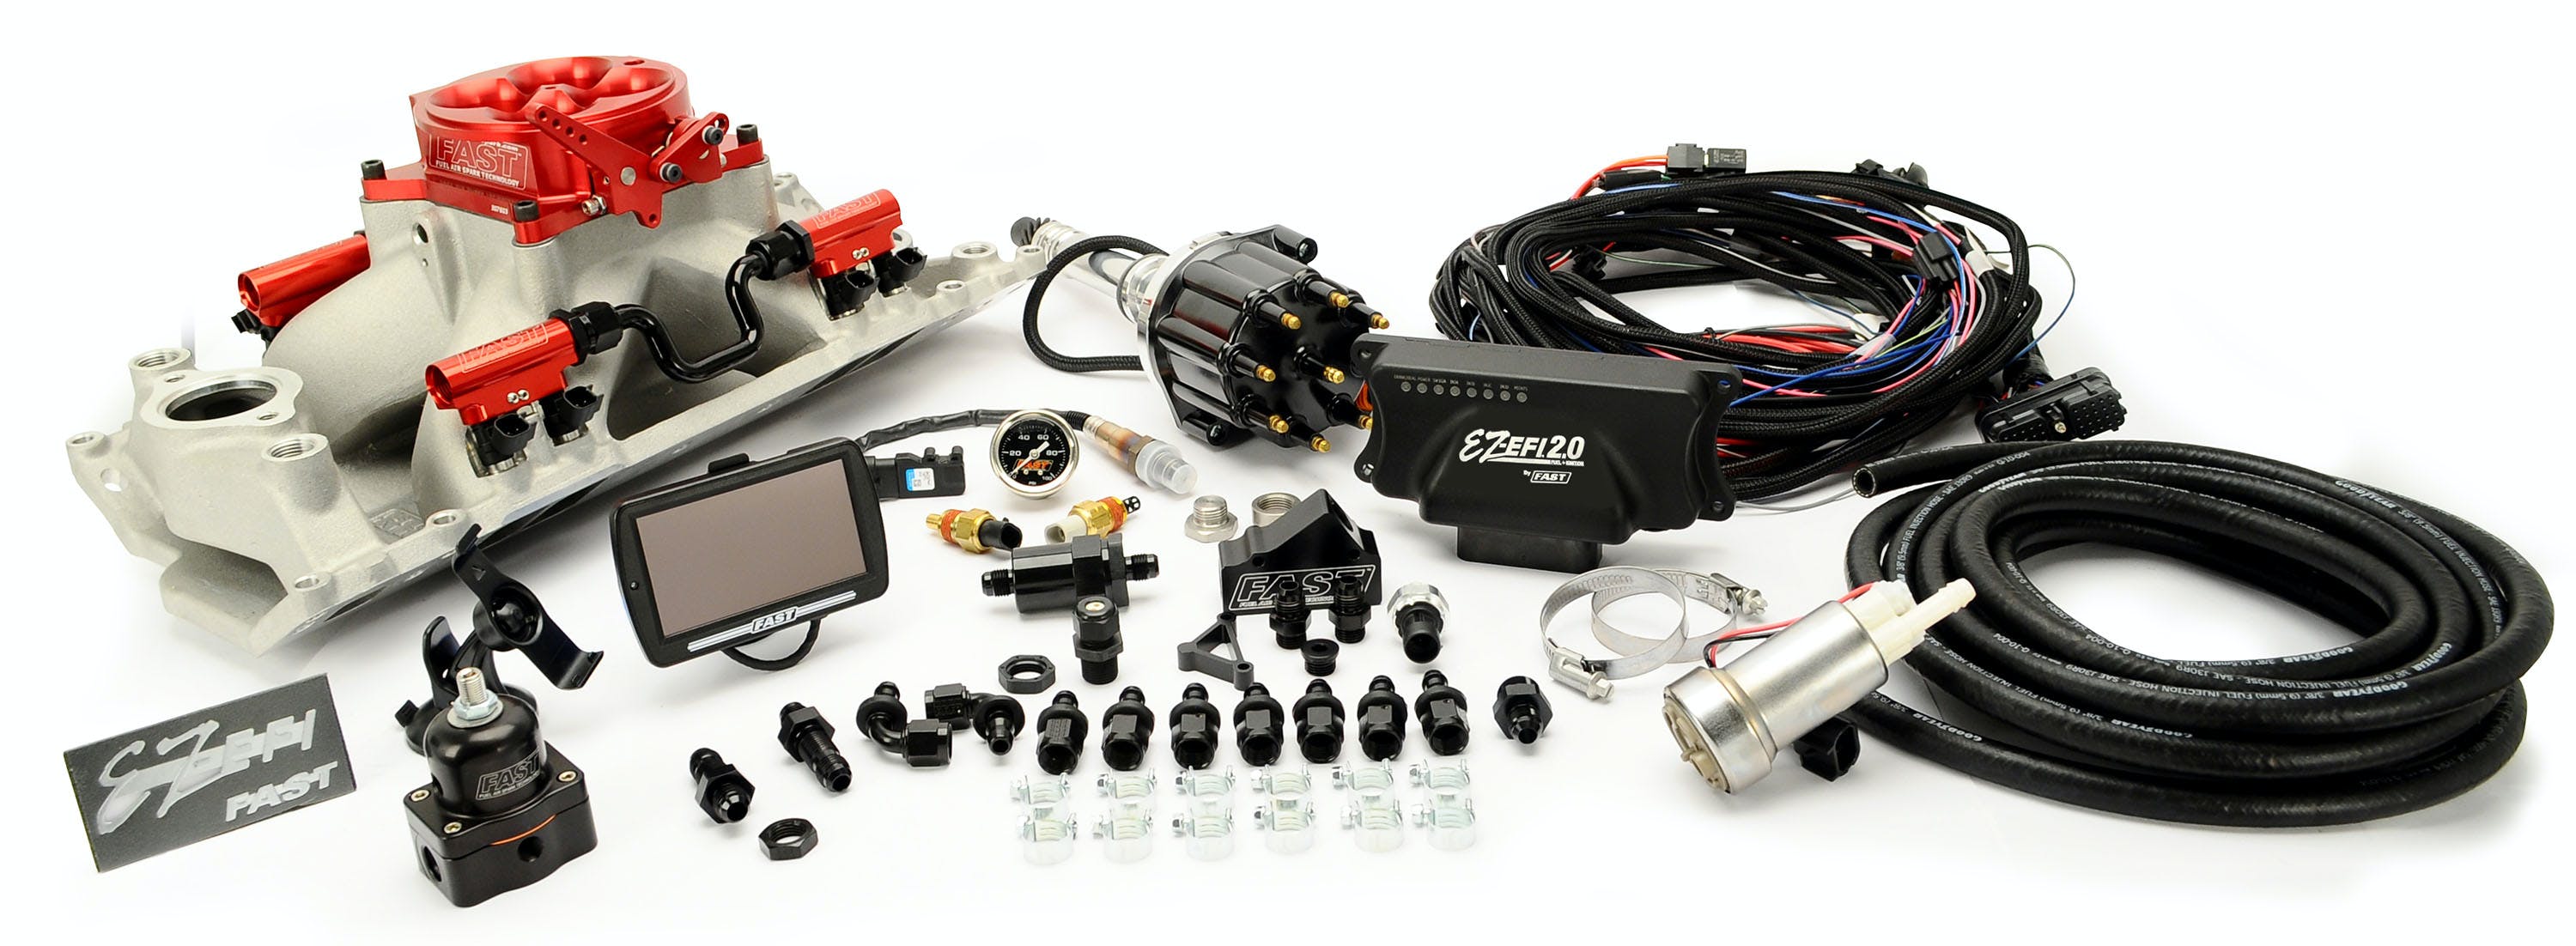 FAST - Fuel Air Spark Technology 30435-05T EZ 2.0 351W Multiport w/intake, rails, throttle body, distributor and fuel pump